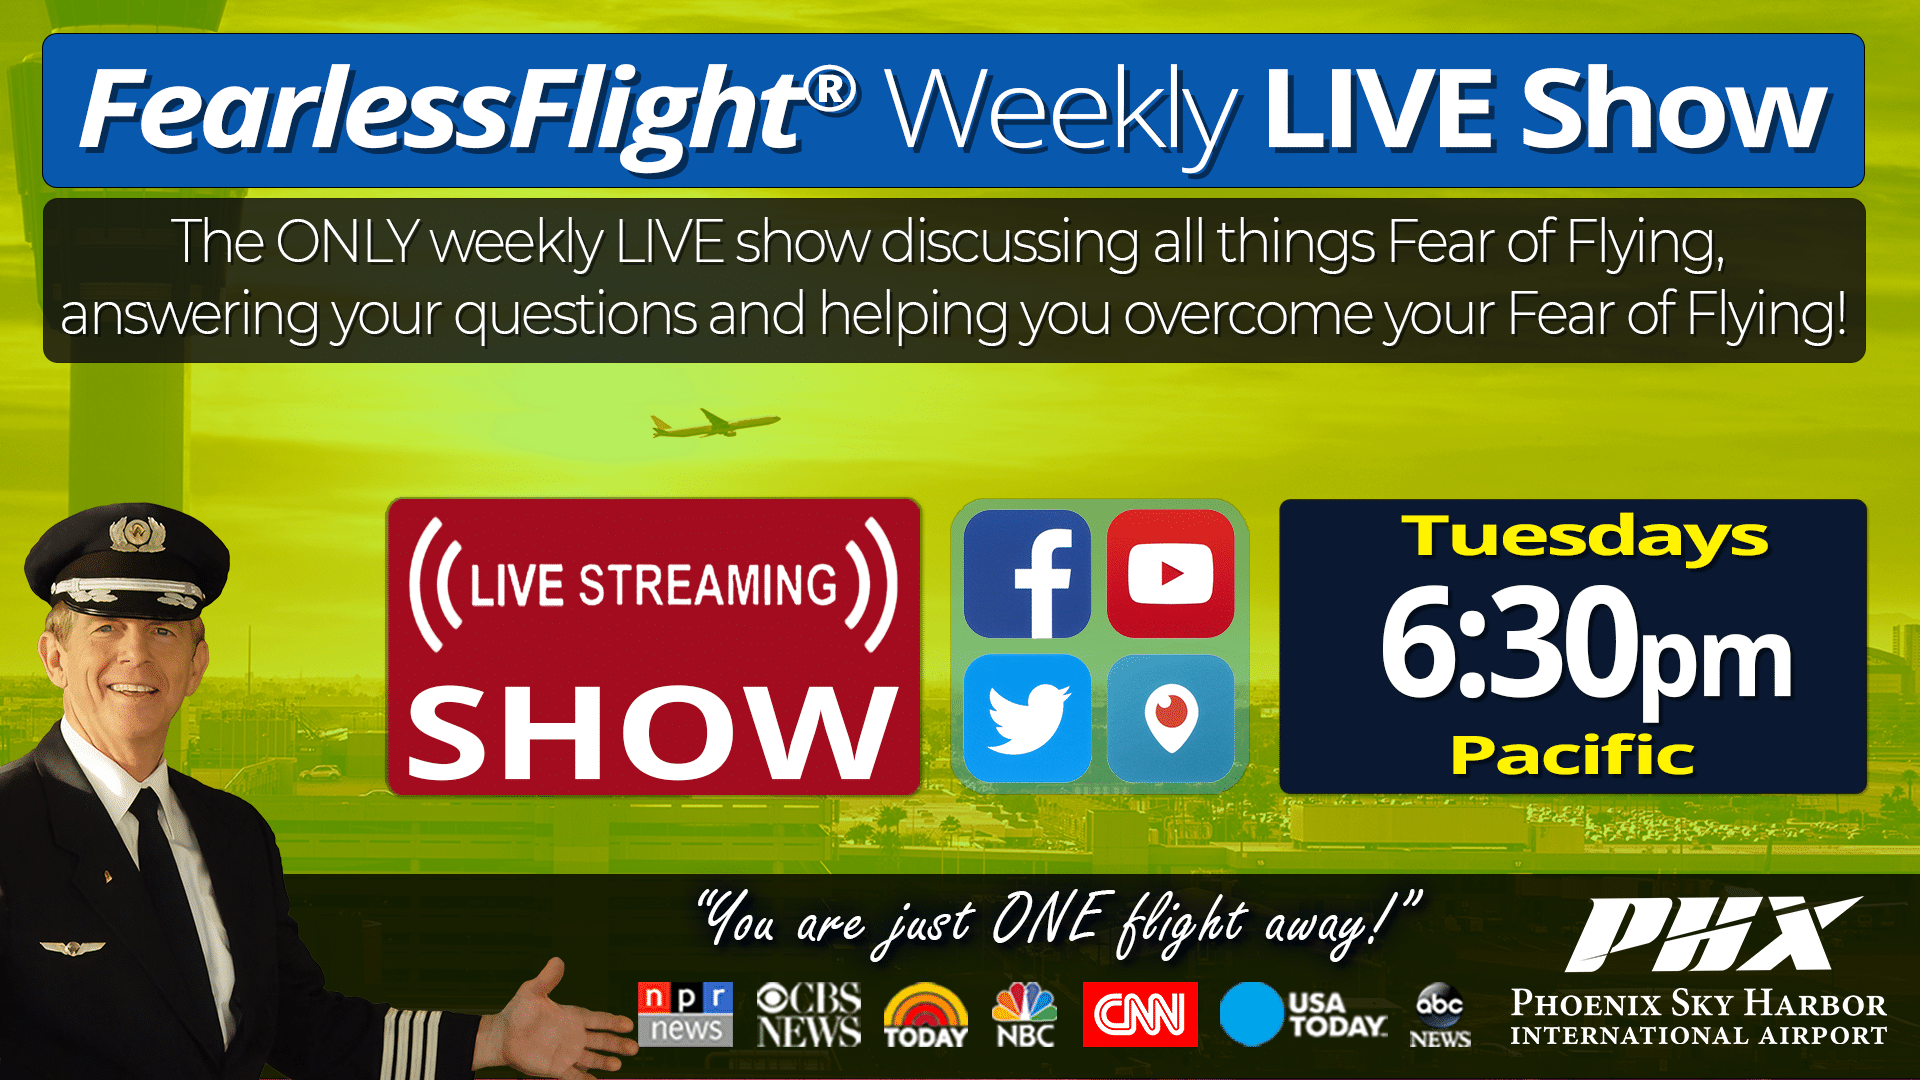 FLF Weekly LIVE Show